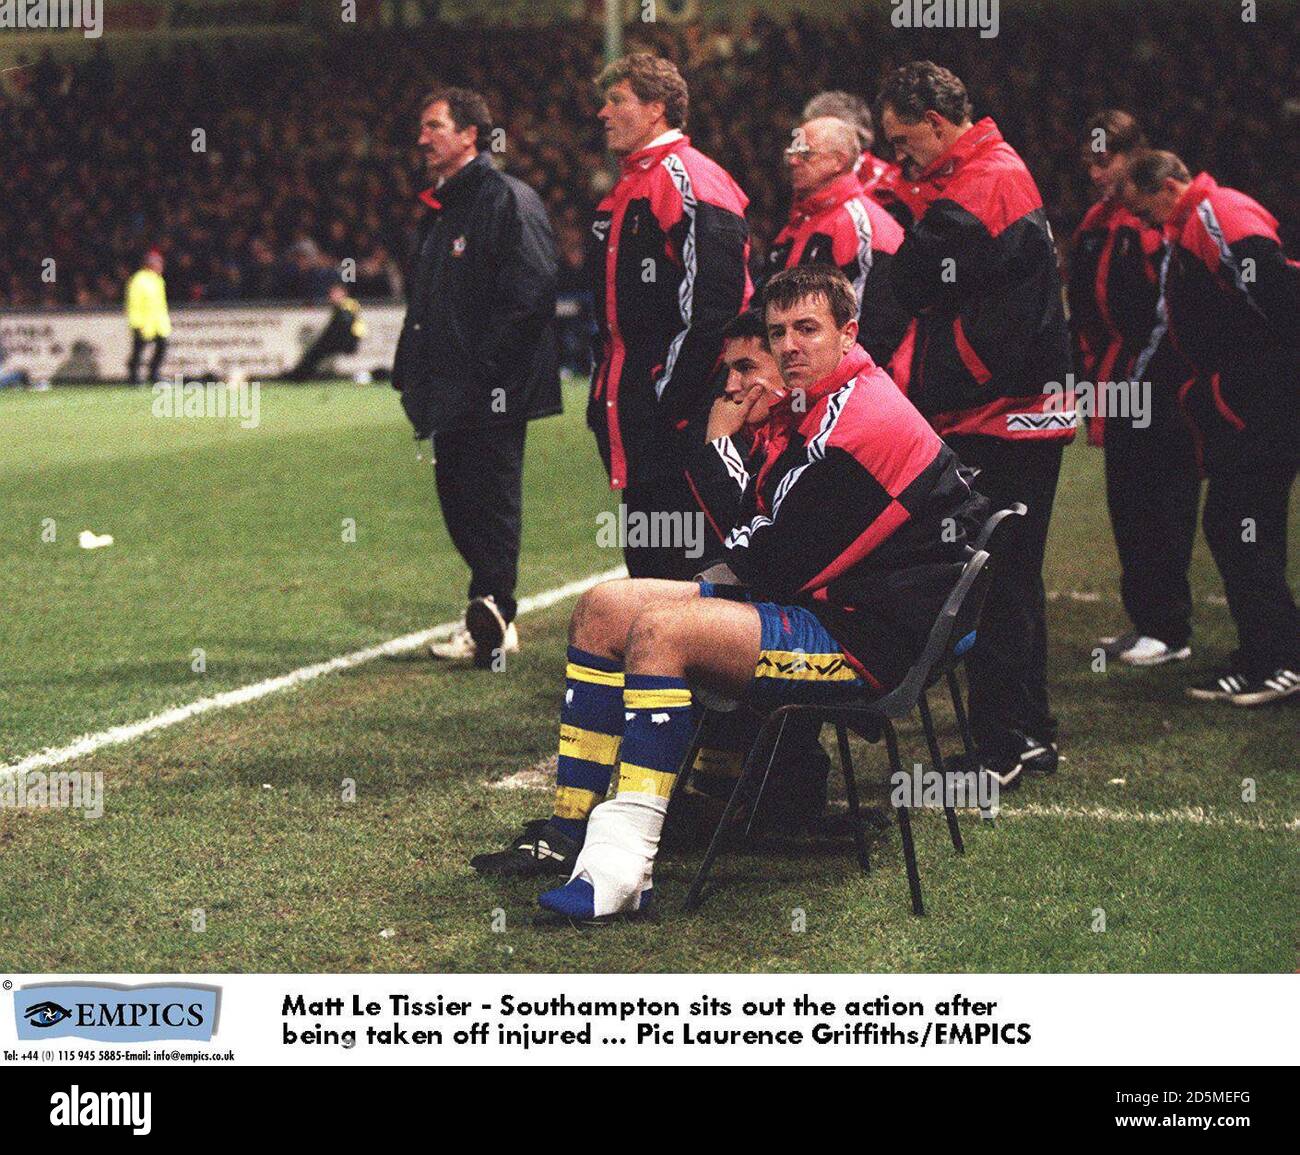 Matthew Le Tissier - Southampton sits out of the action after being taken off injured Stock Photo